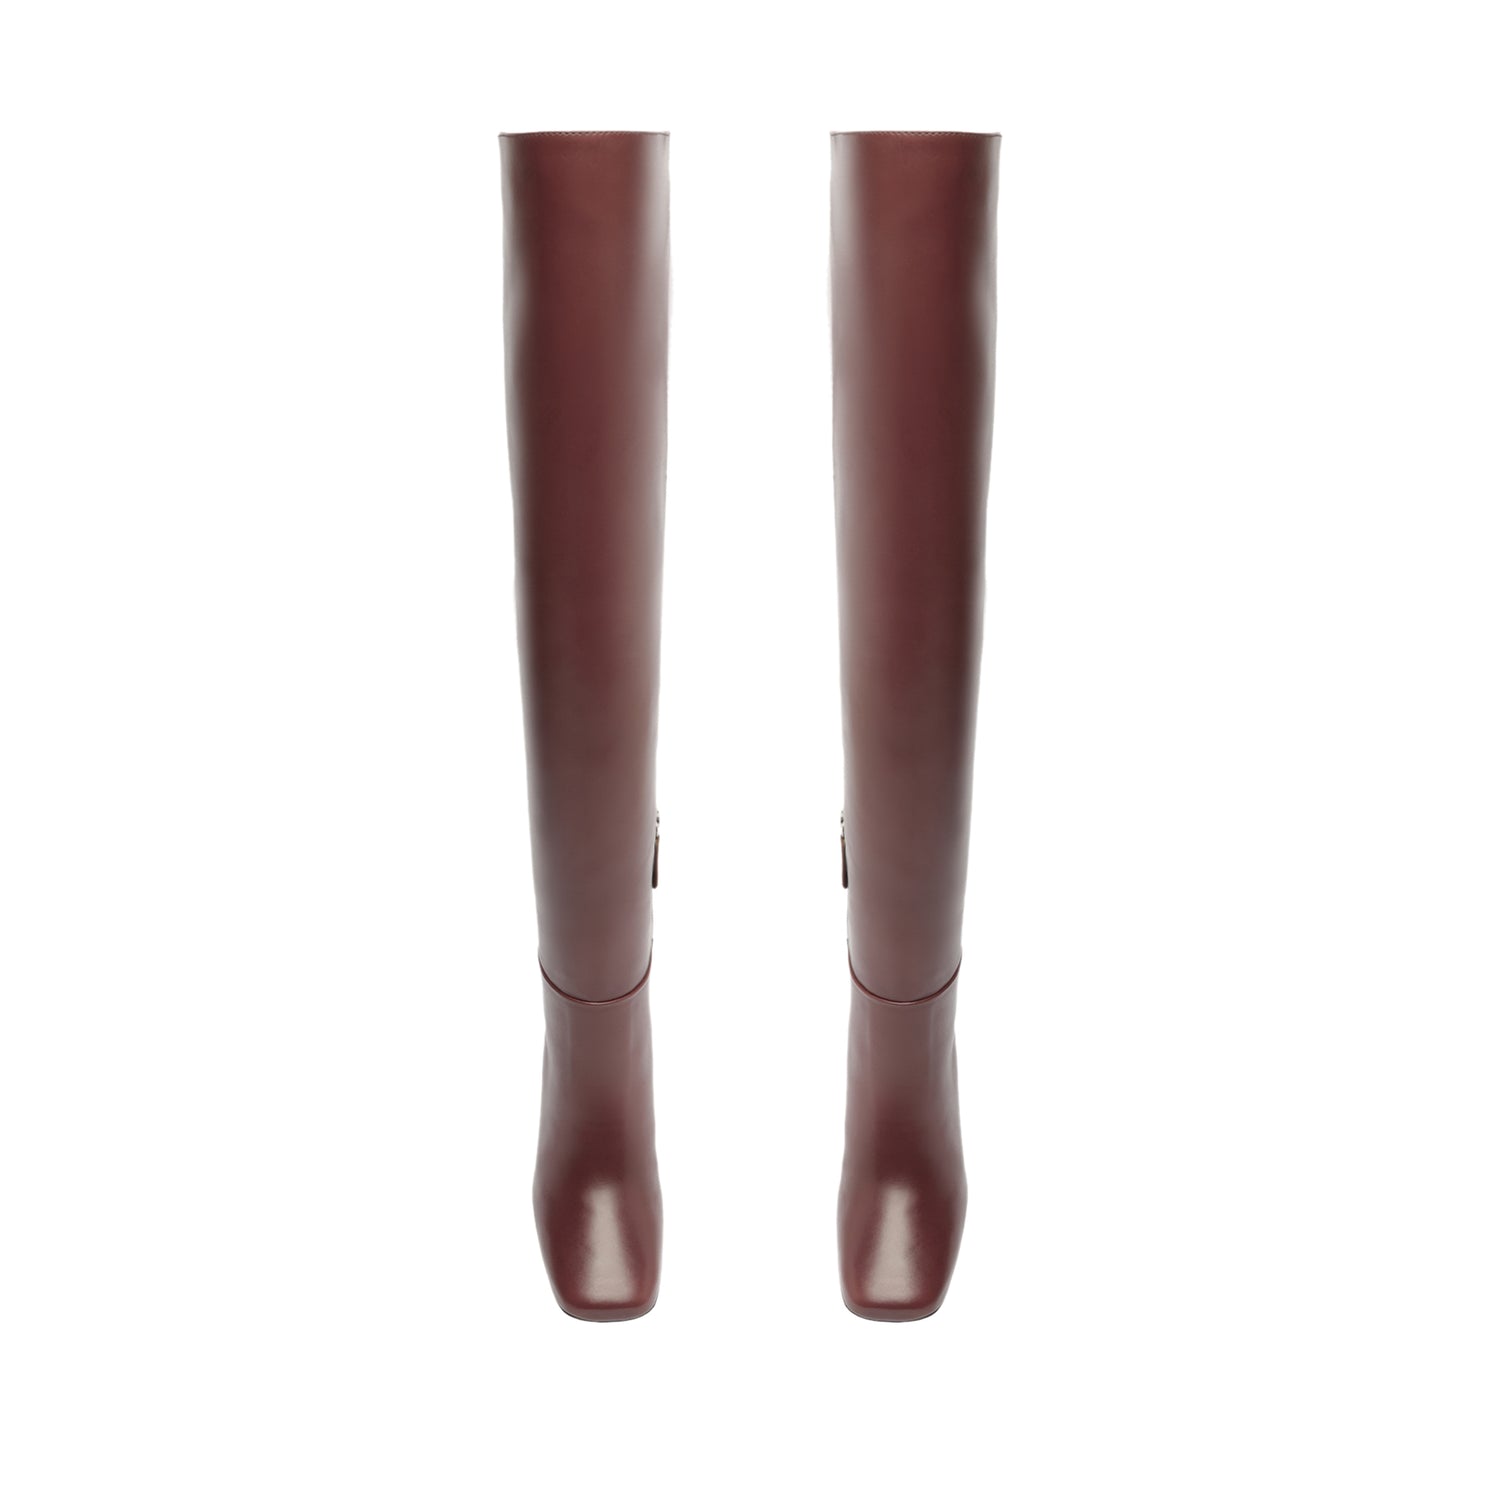 Austine Leather Boot Boots Open Stock    - Schutz Shoes